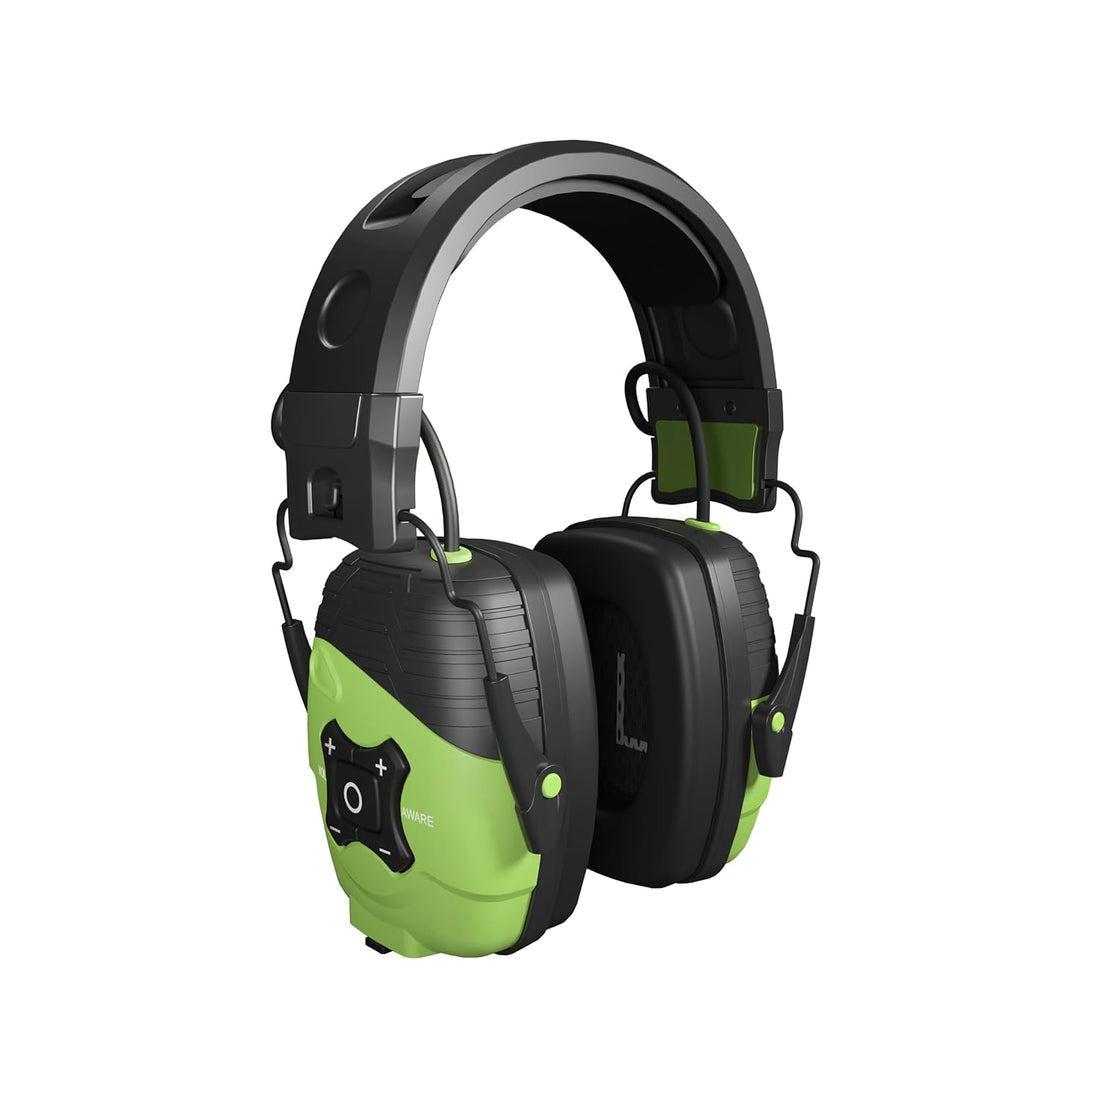 ISOtunes LINK Aware Bluetooth Earmuffs: Audio Passthrough Hearing Protection